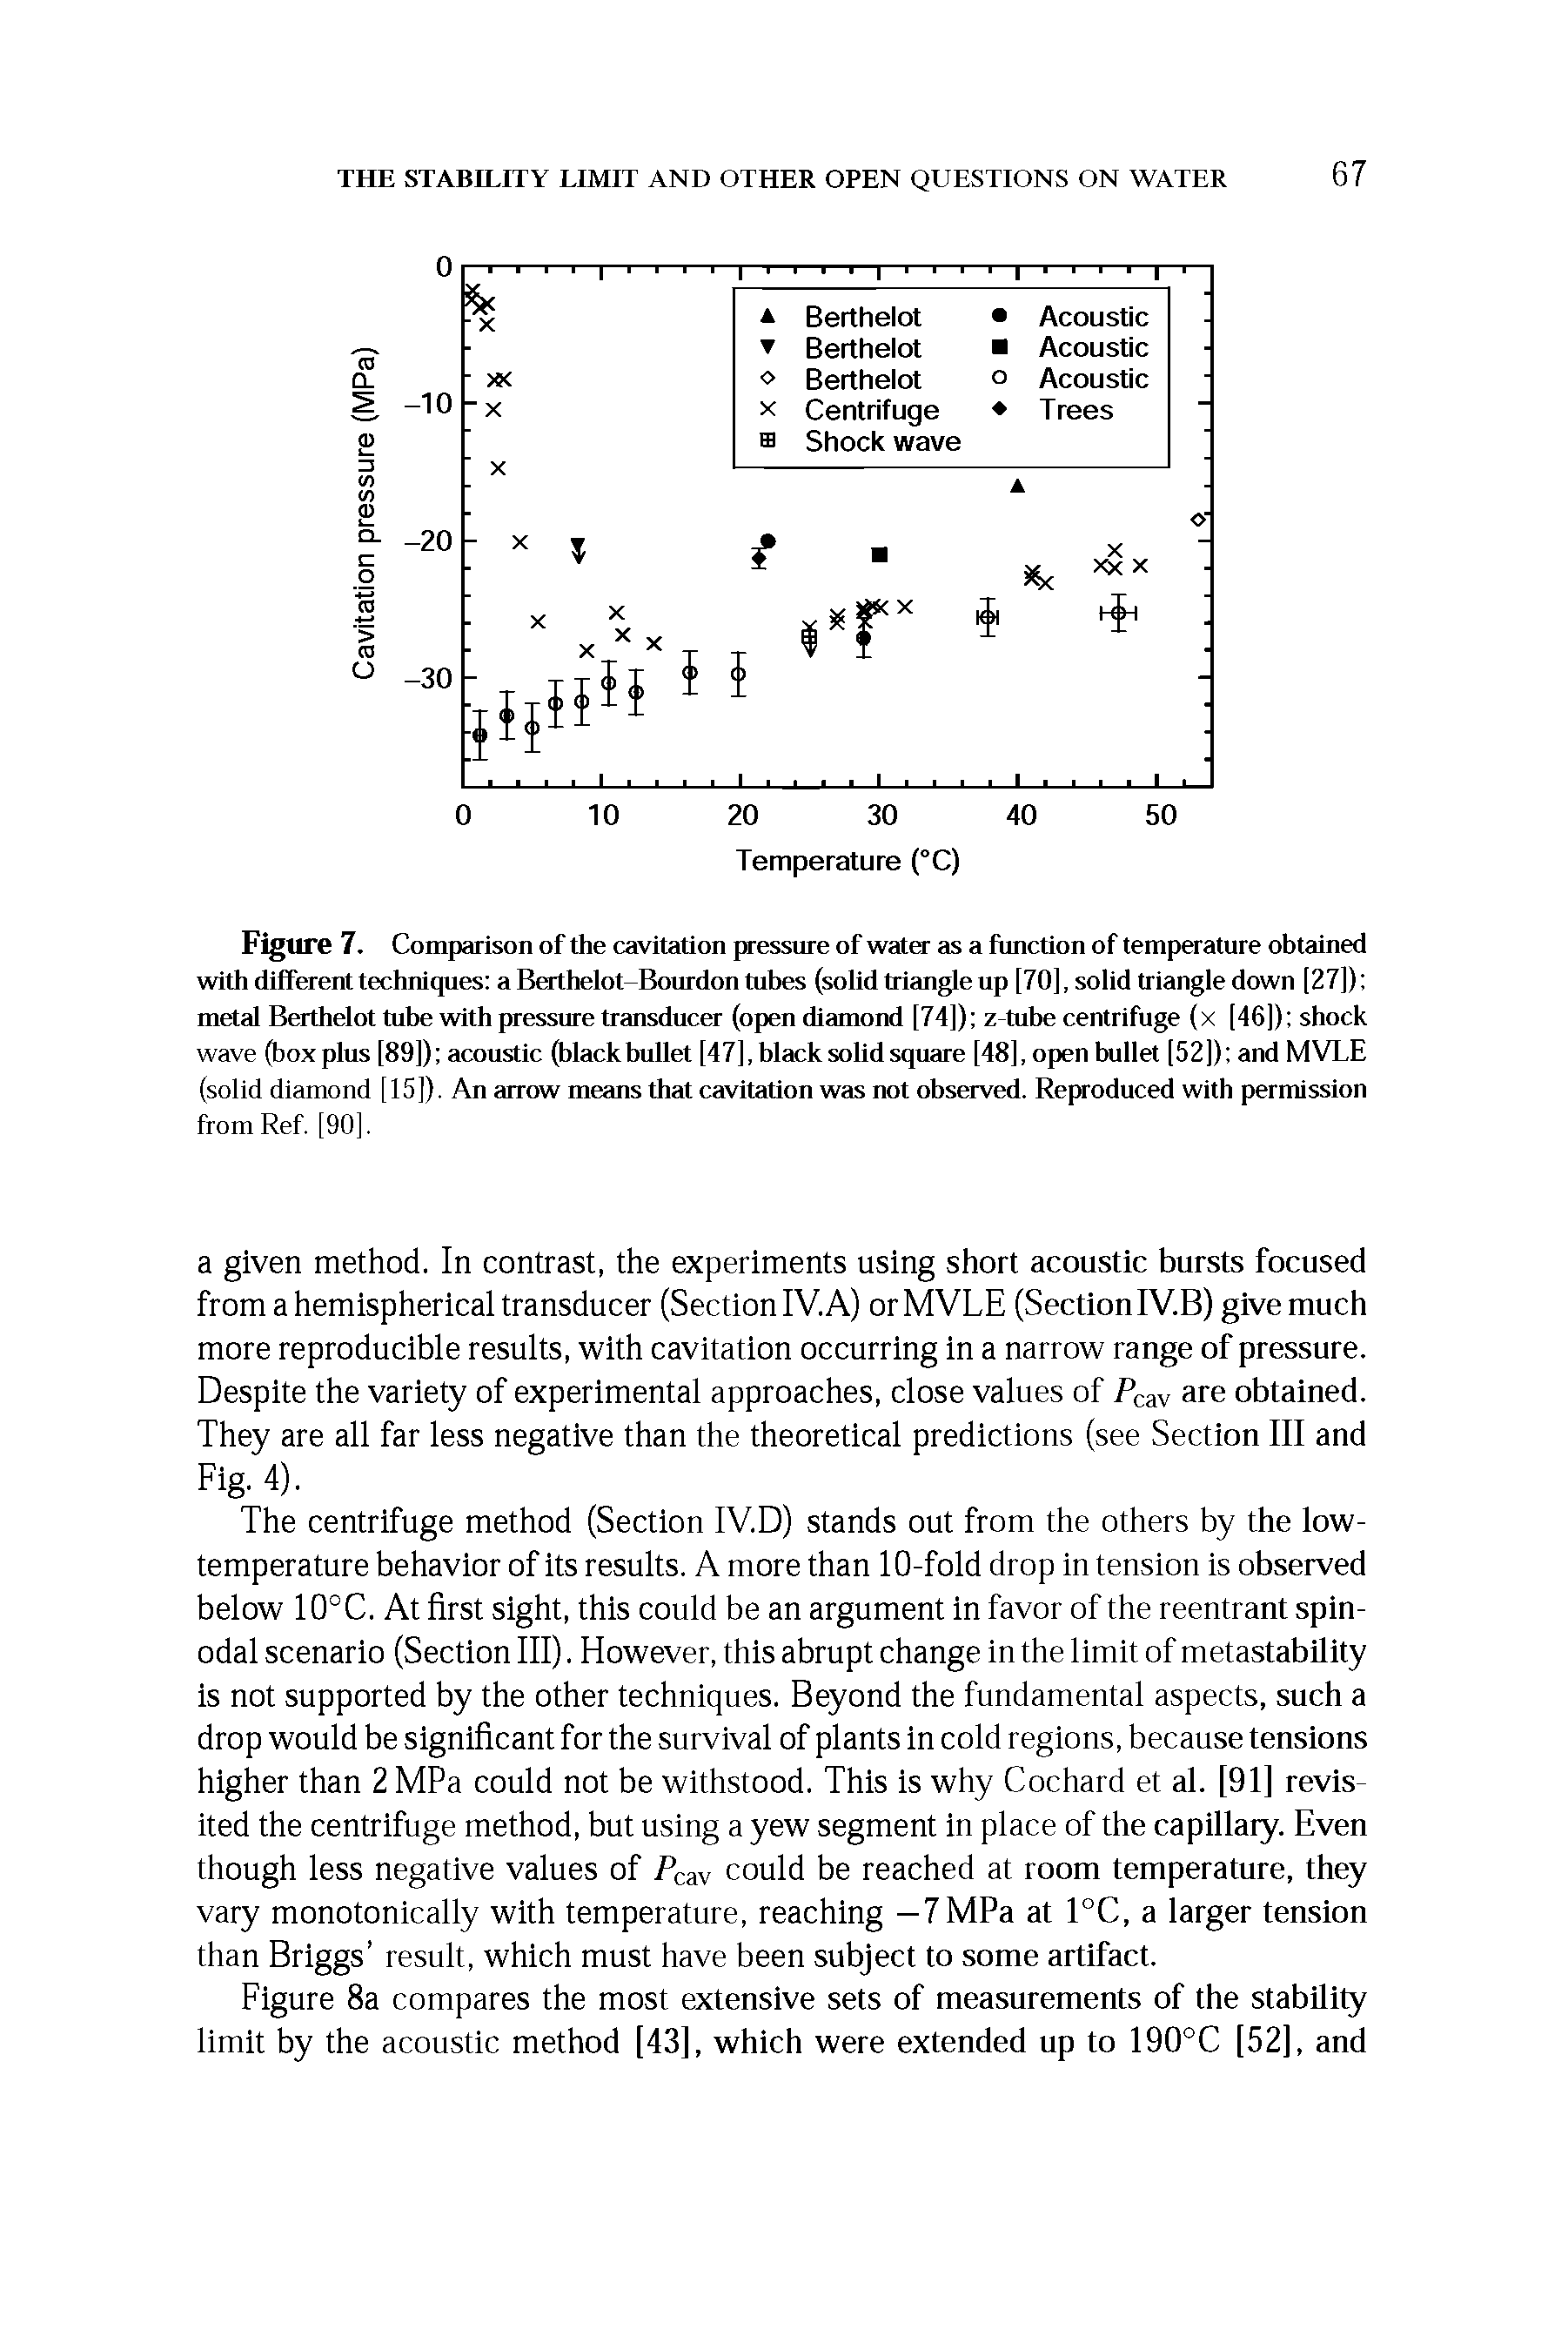 Figure 7. Comparison of the cavitation pressure of water as a function of temperature obtained with different techniques a Berthelot-Bourdon tubes (solid triangle up [70], solid triangle down [27]) metal Berthelot tube with pressure transducer (open diamond [74]) z tube centrifuge (x [46]) shock wave (box plus [89]) acoustic (black bullet [47], black solid square [48], open bullet [52]) and MVLE (solid diamond [ 15 ]). An arrow means that cavitation was not observed. Reproduced with permission from Ref. [90].